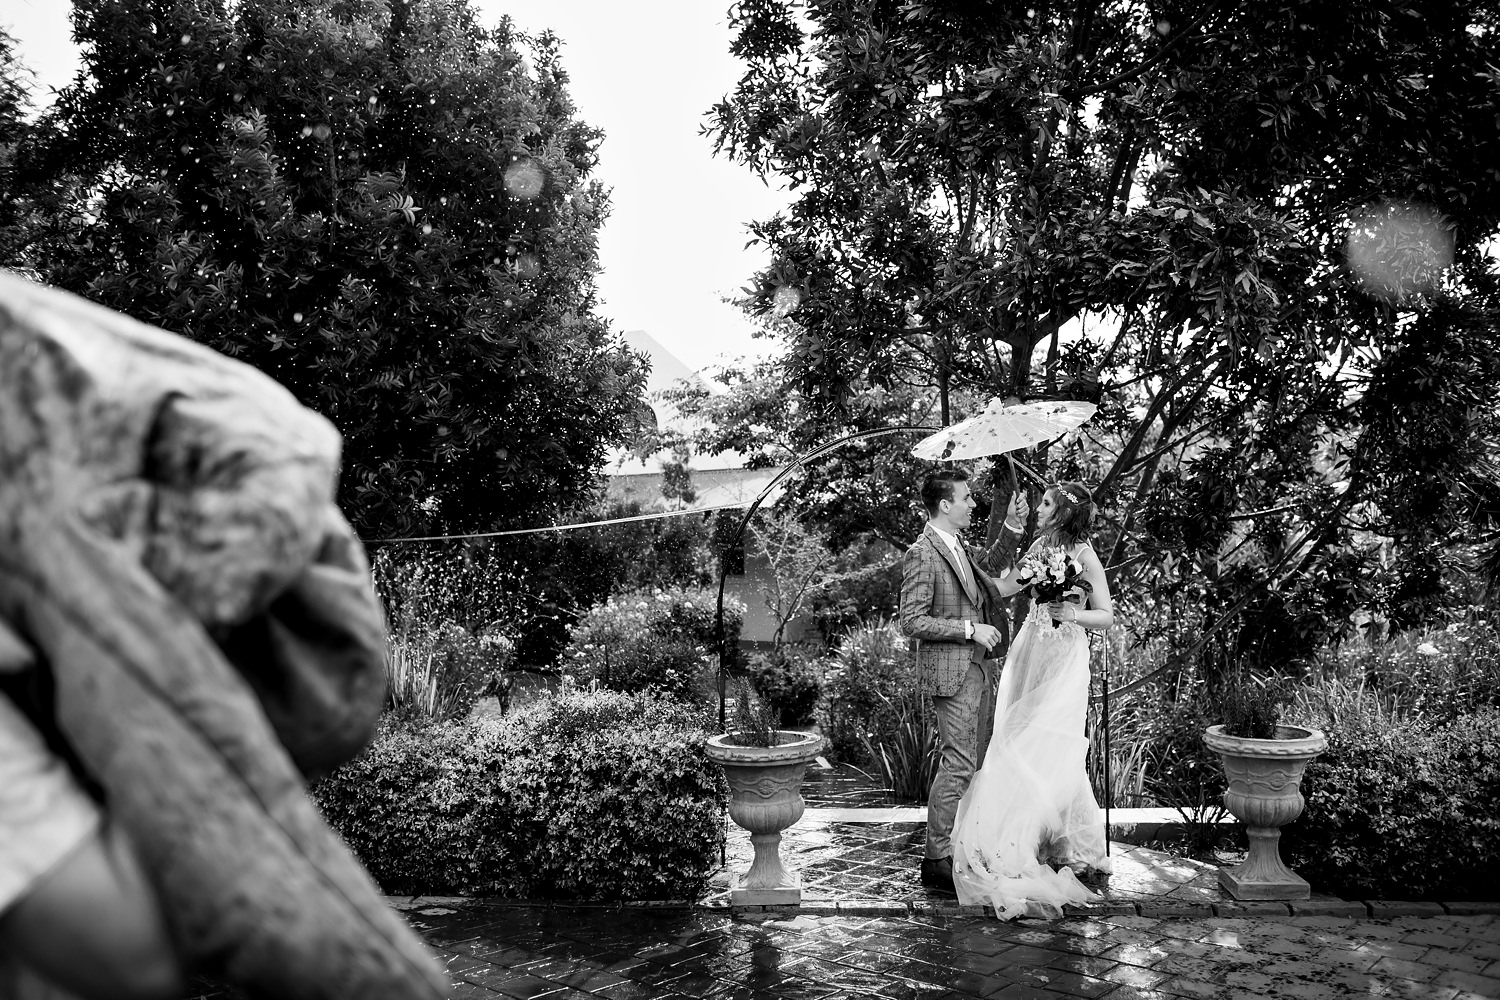 Rain on your wedding day can present truly beautiful moments if your photographer is confident and experienced